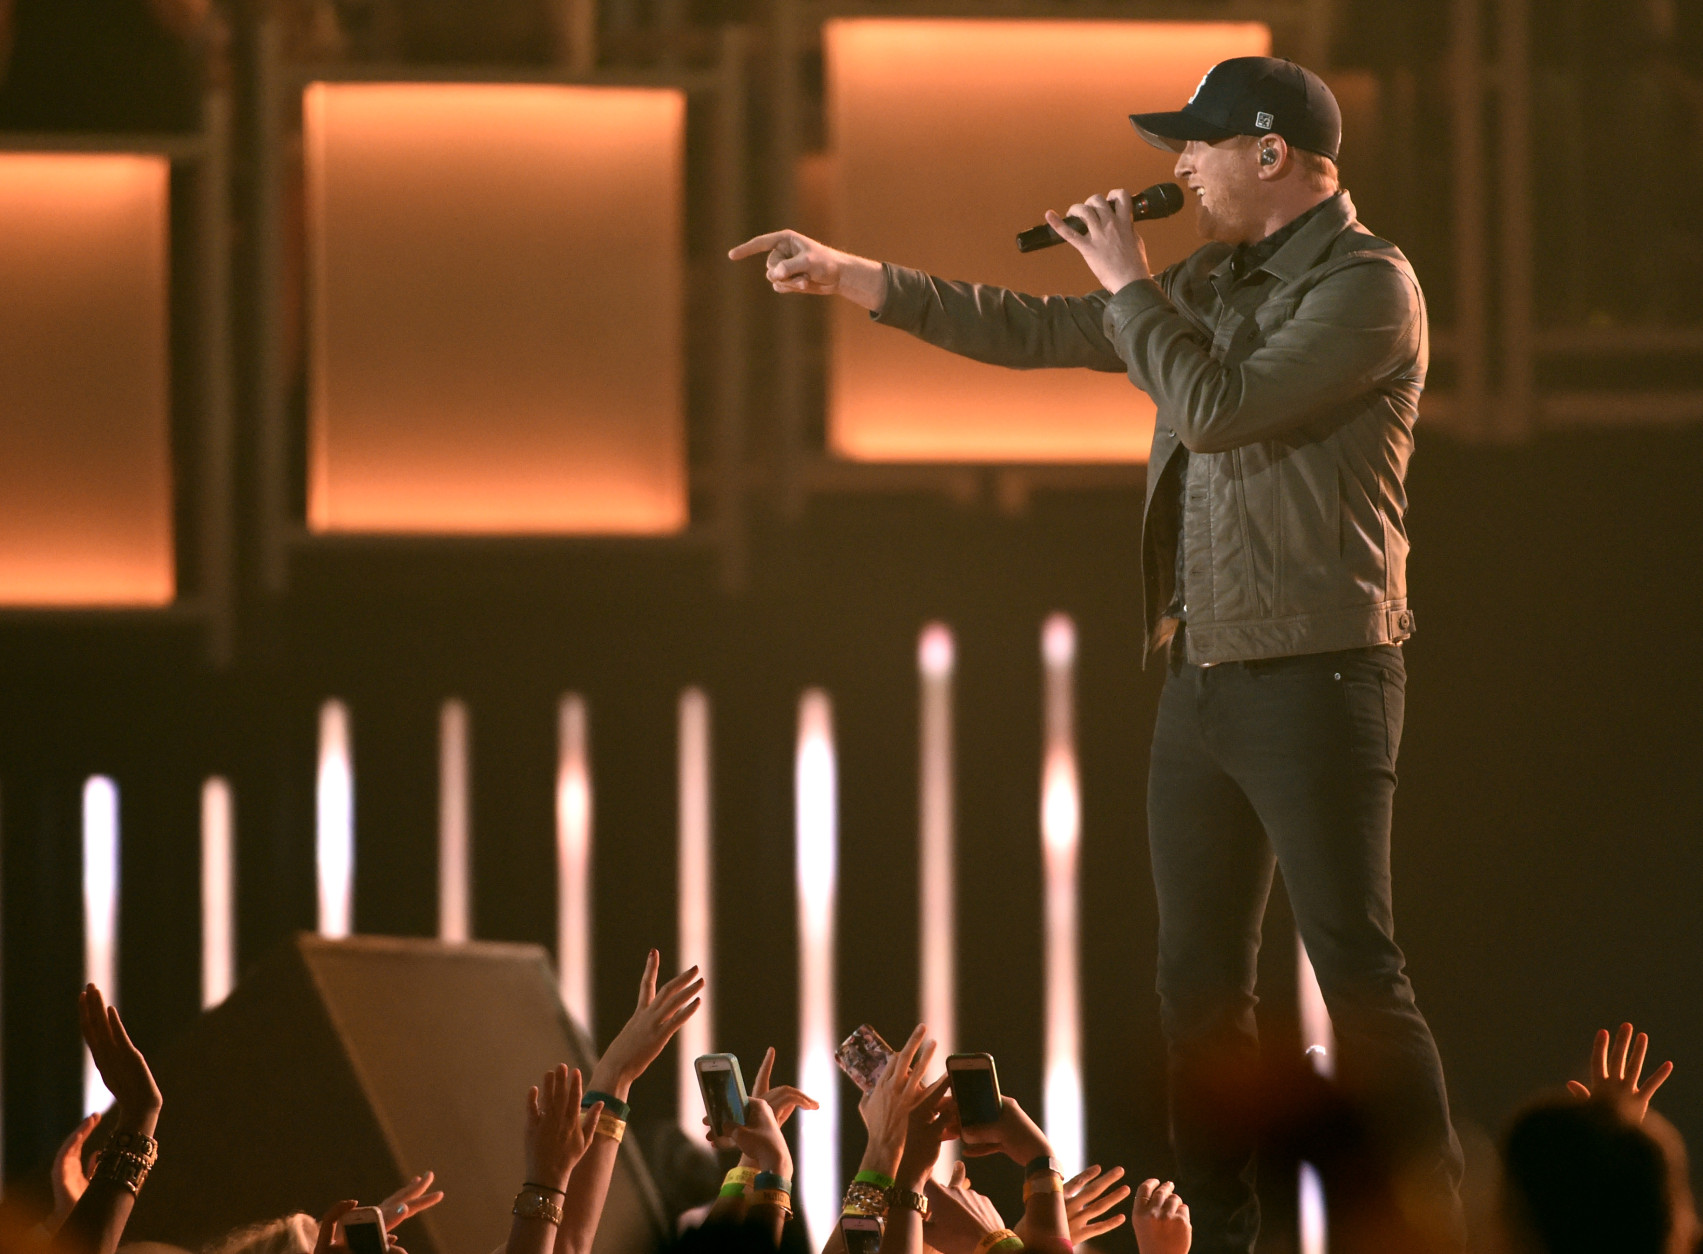 Cole Swindell performs at the 50th annual Academy of Country Music Awards at AT&amp;T Stadium on Sunday, April 19, 2015, in Arlington, Texas. (Photo by Chris Pizzello/Invision/AP)